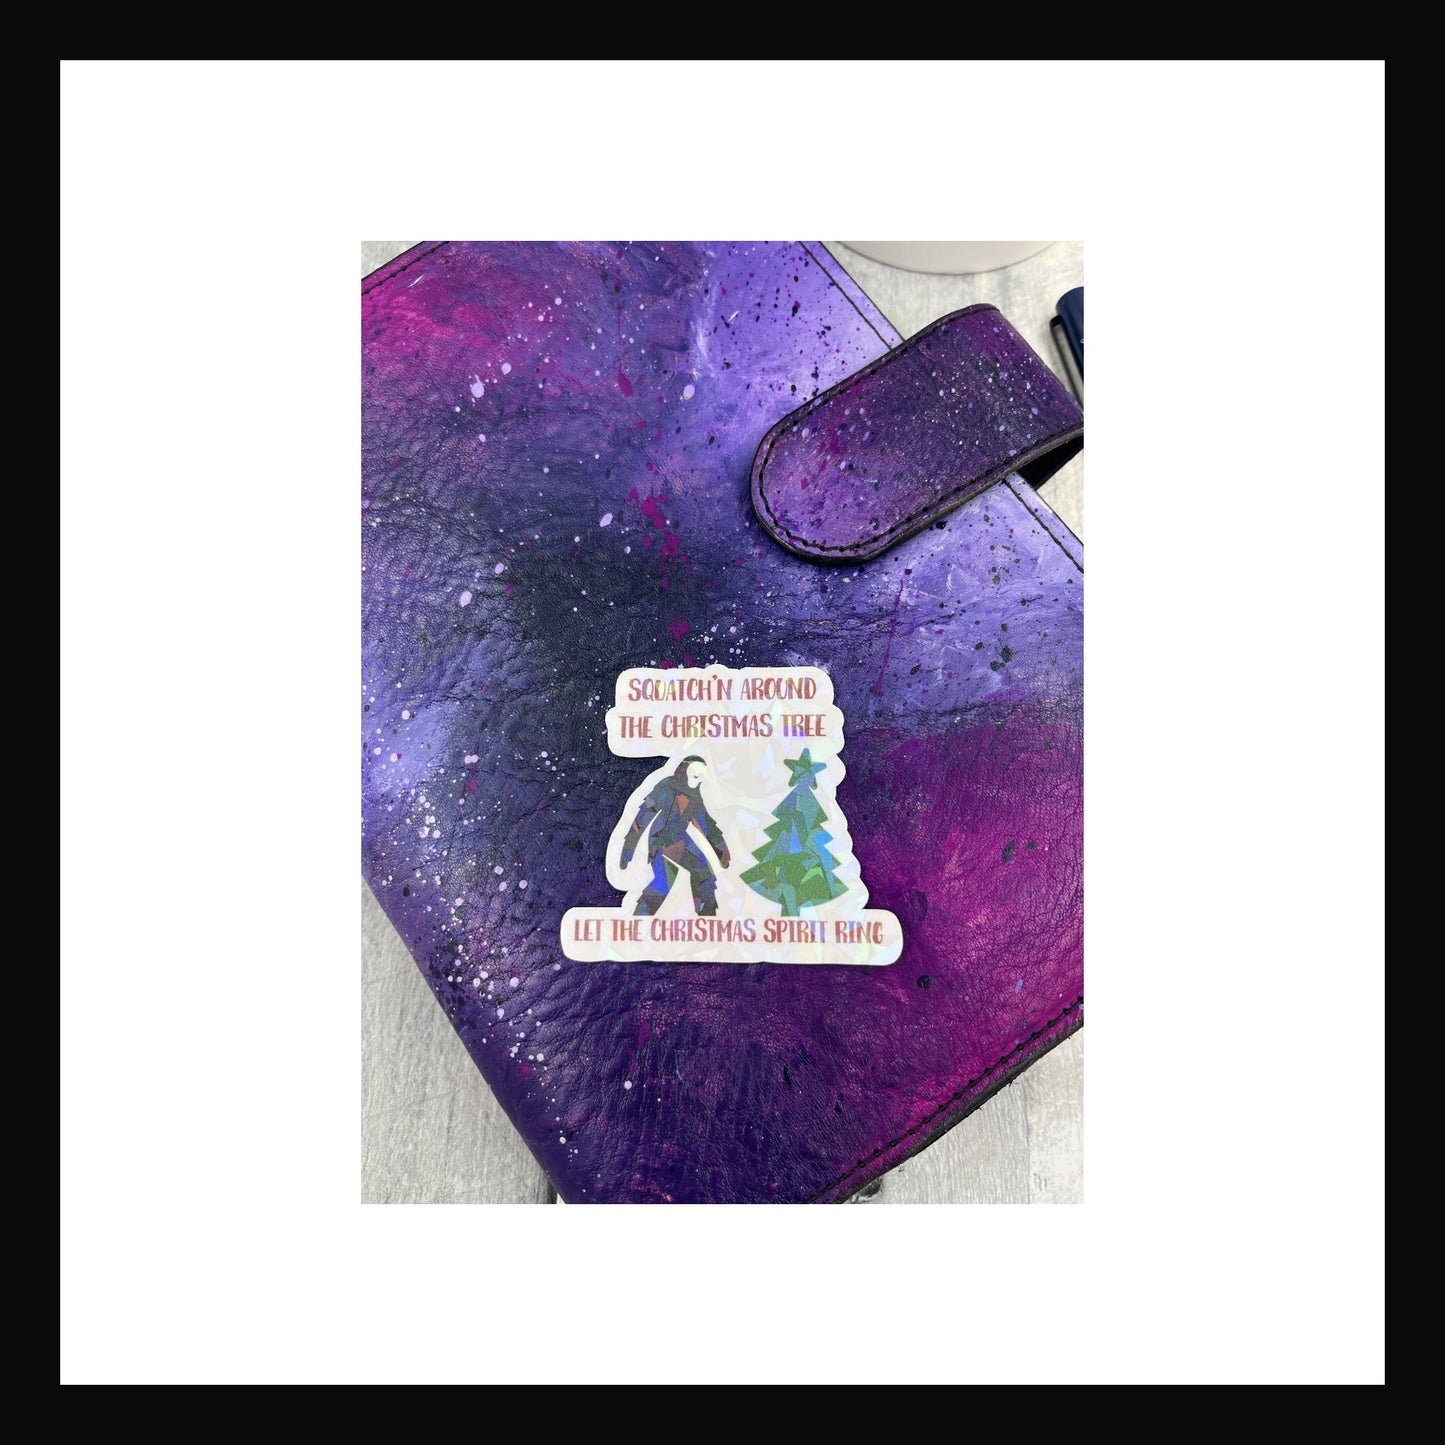 Holographic die cut sticker featuring christmas tree and Sasquatch. "Squatchin' around the christmas tree let the christmas spirit ring"